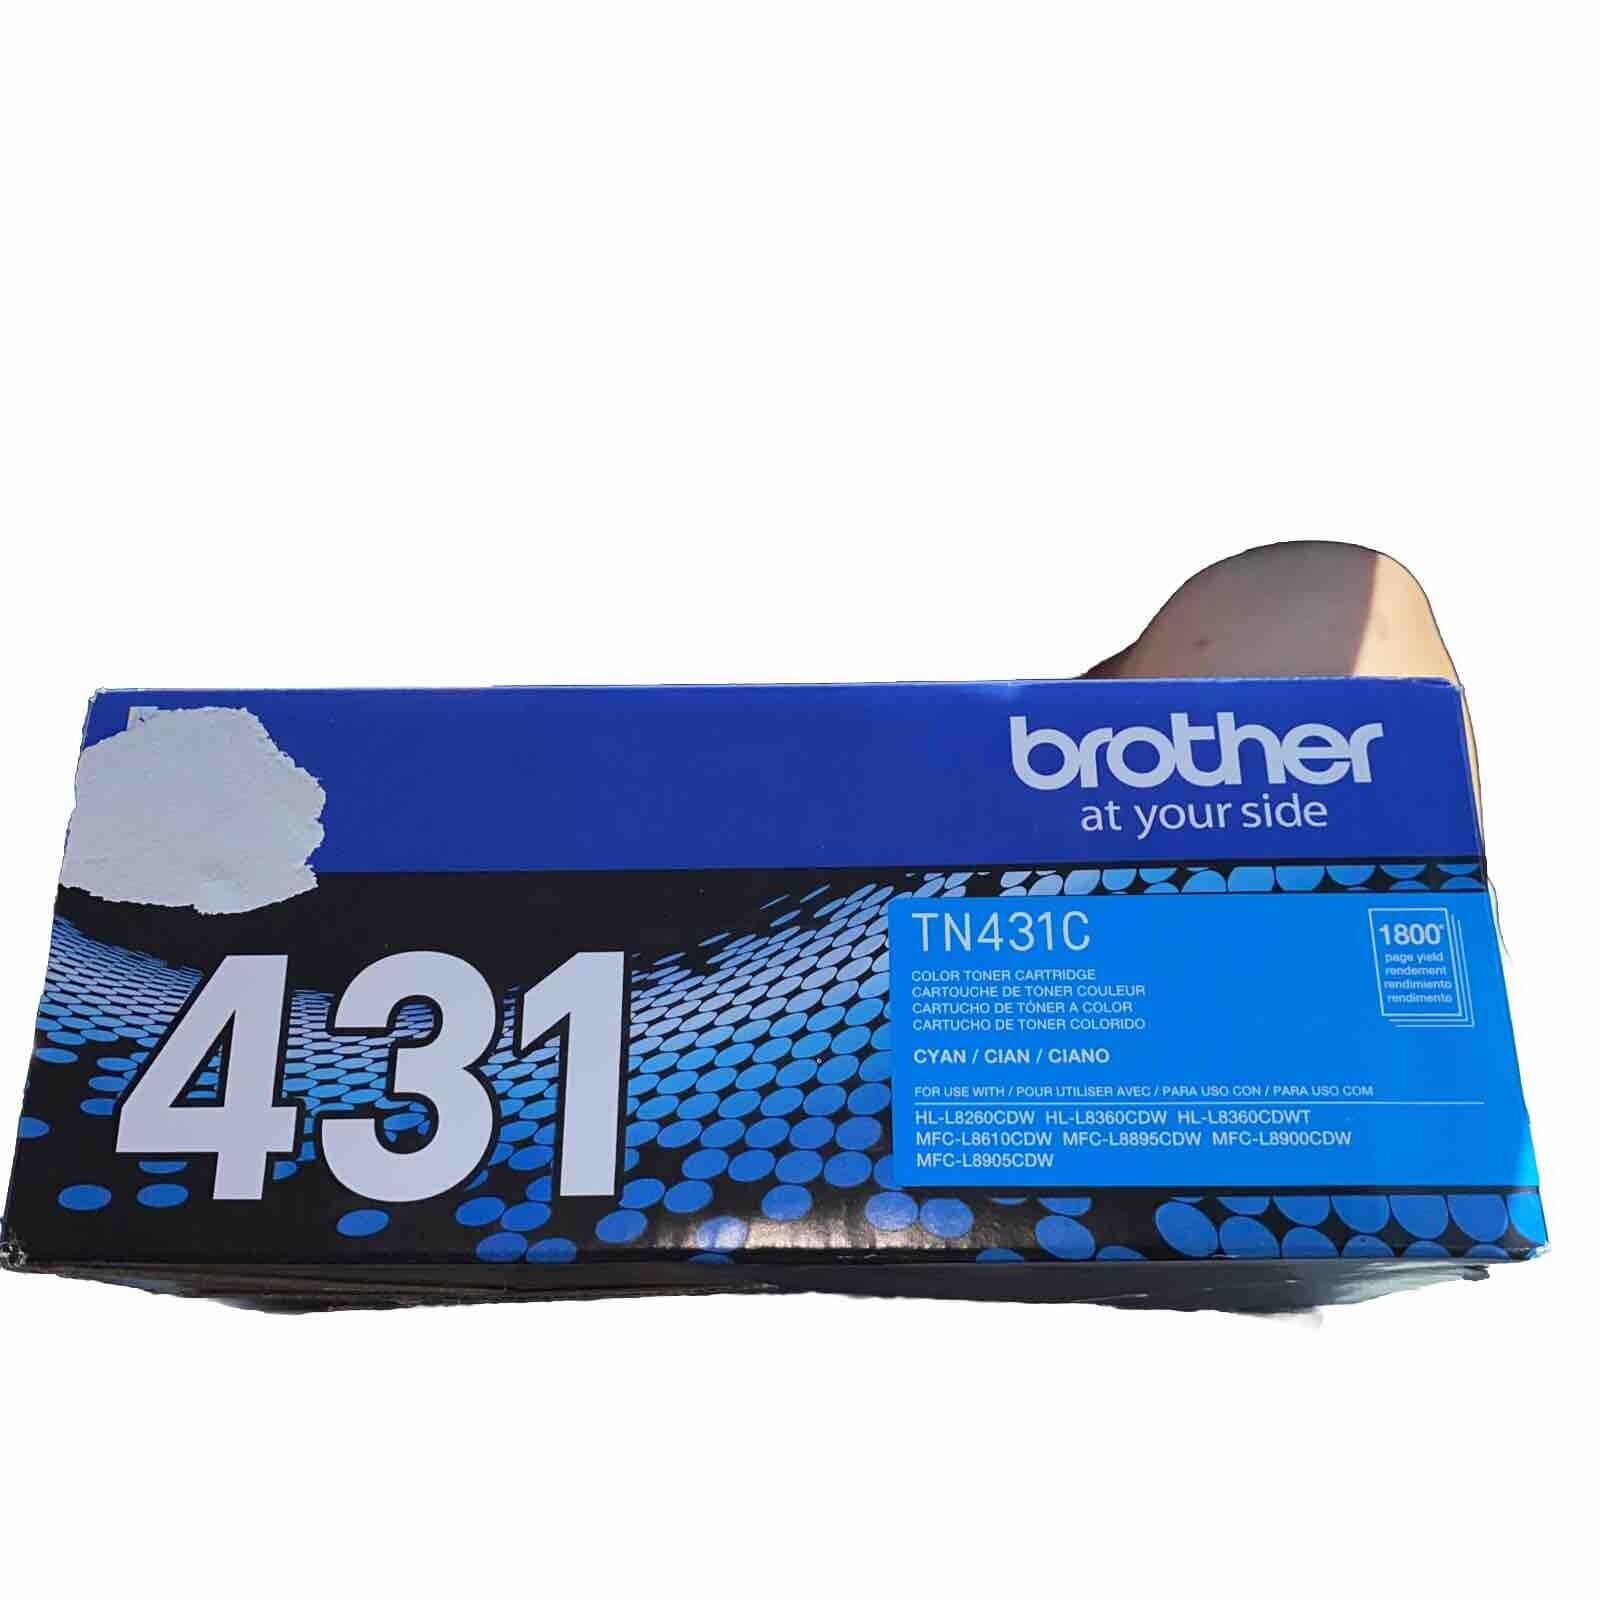 Brother TN-431C Cyan Color Toner Cartridge 1800 Page Yeild New Sealed